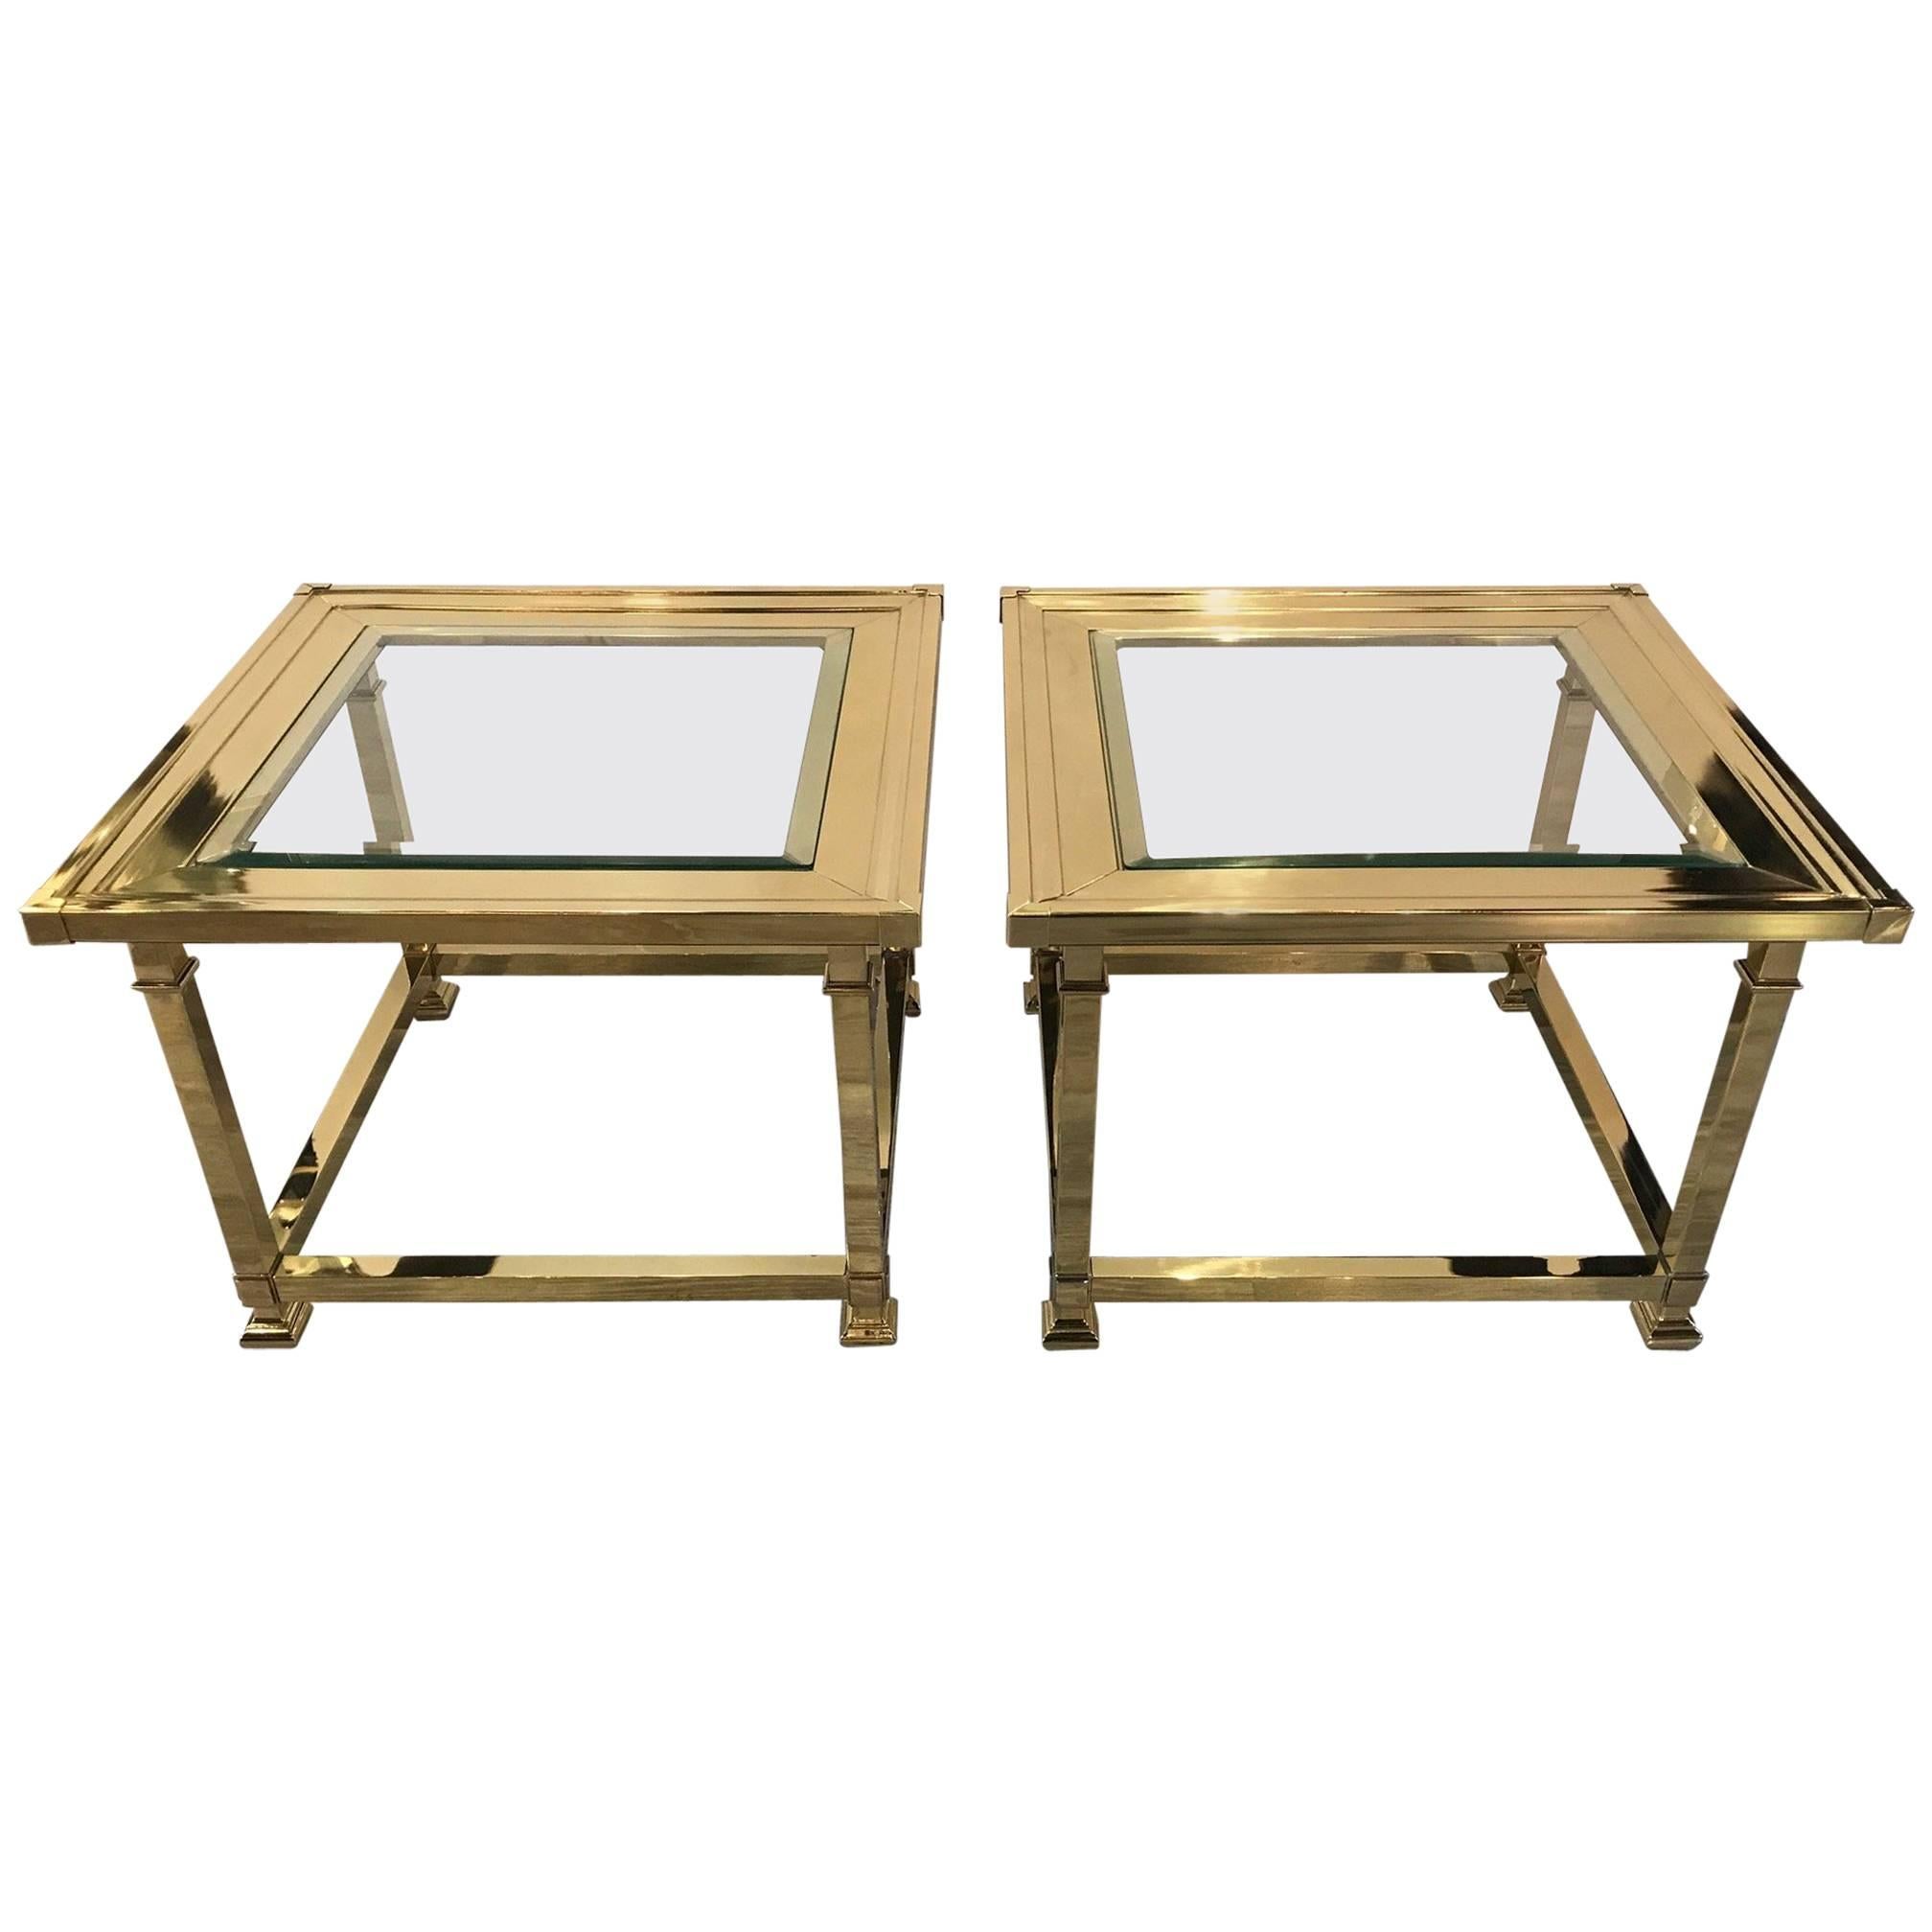 Pair of Mastercraft Square Bunching Tables